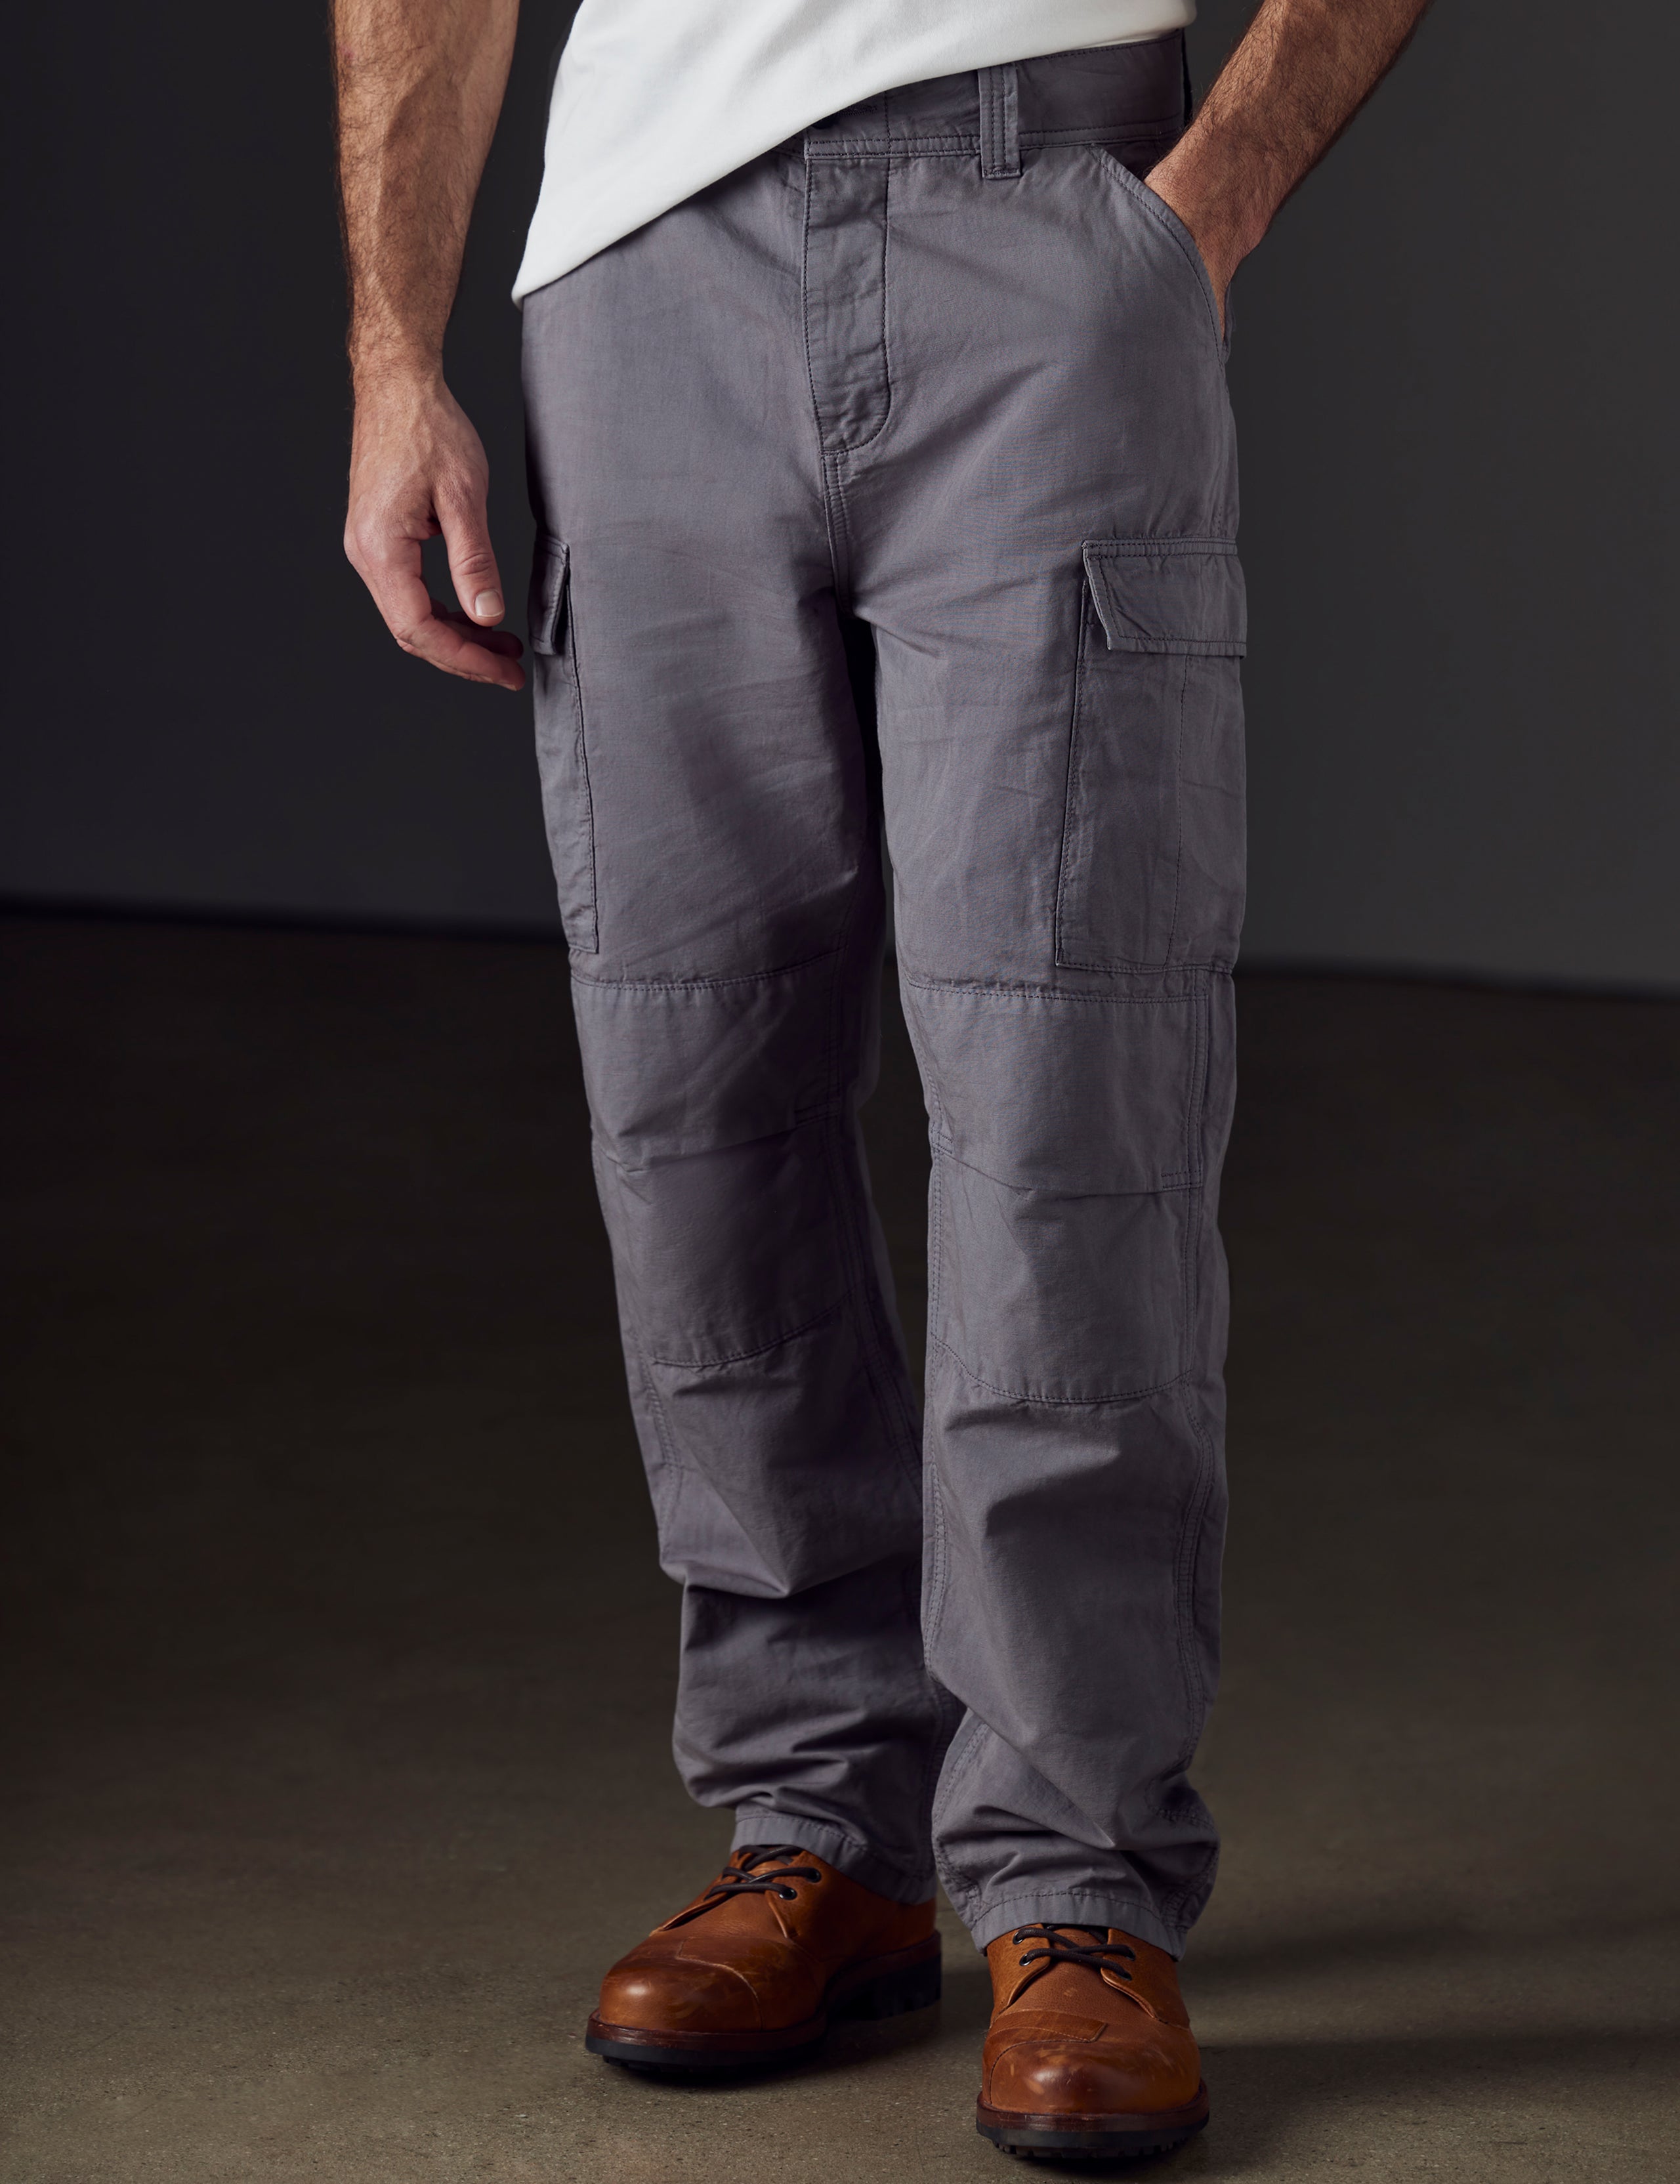 grey fatigue pants from AETHER Apparel